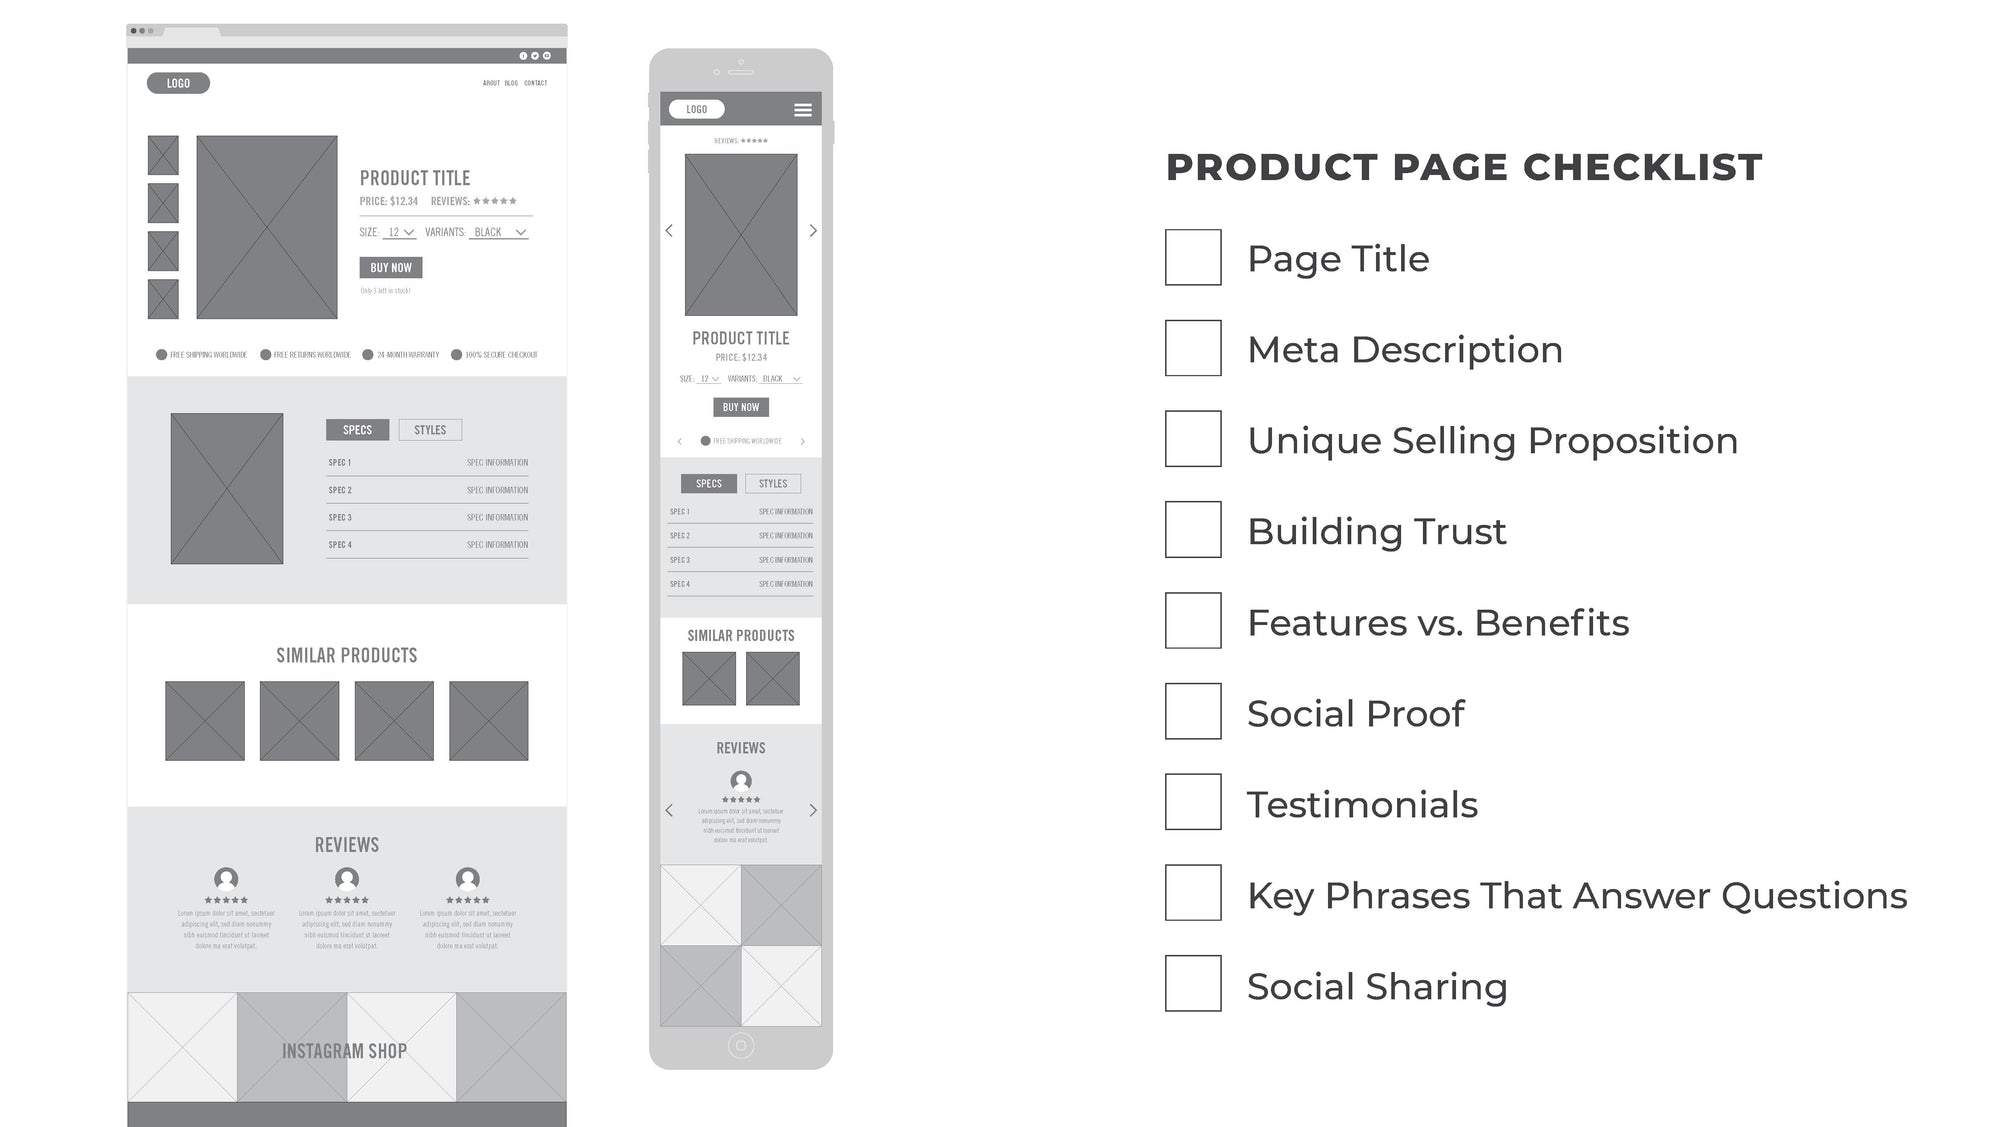 The Perfect Product Page Checklist